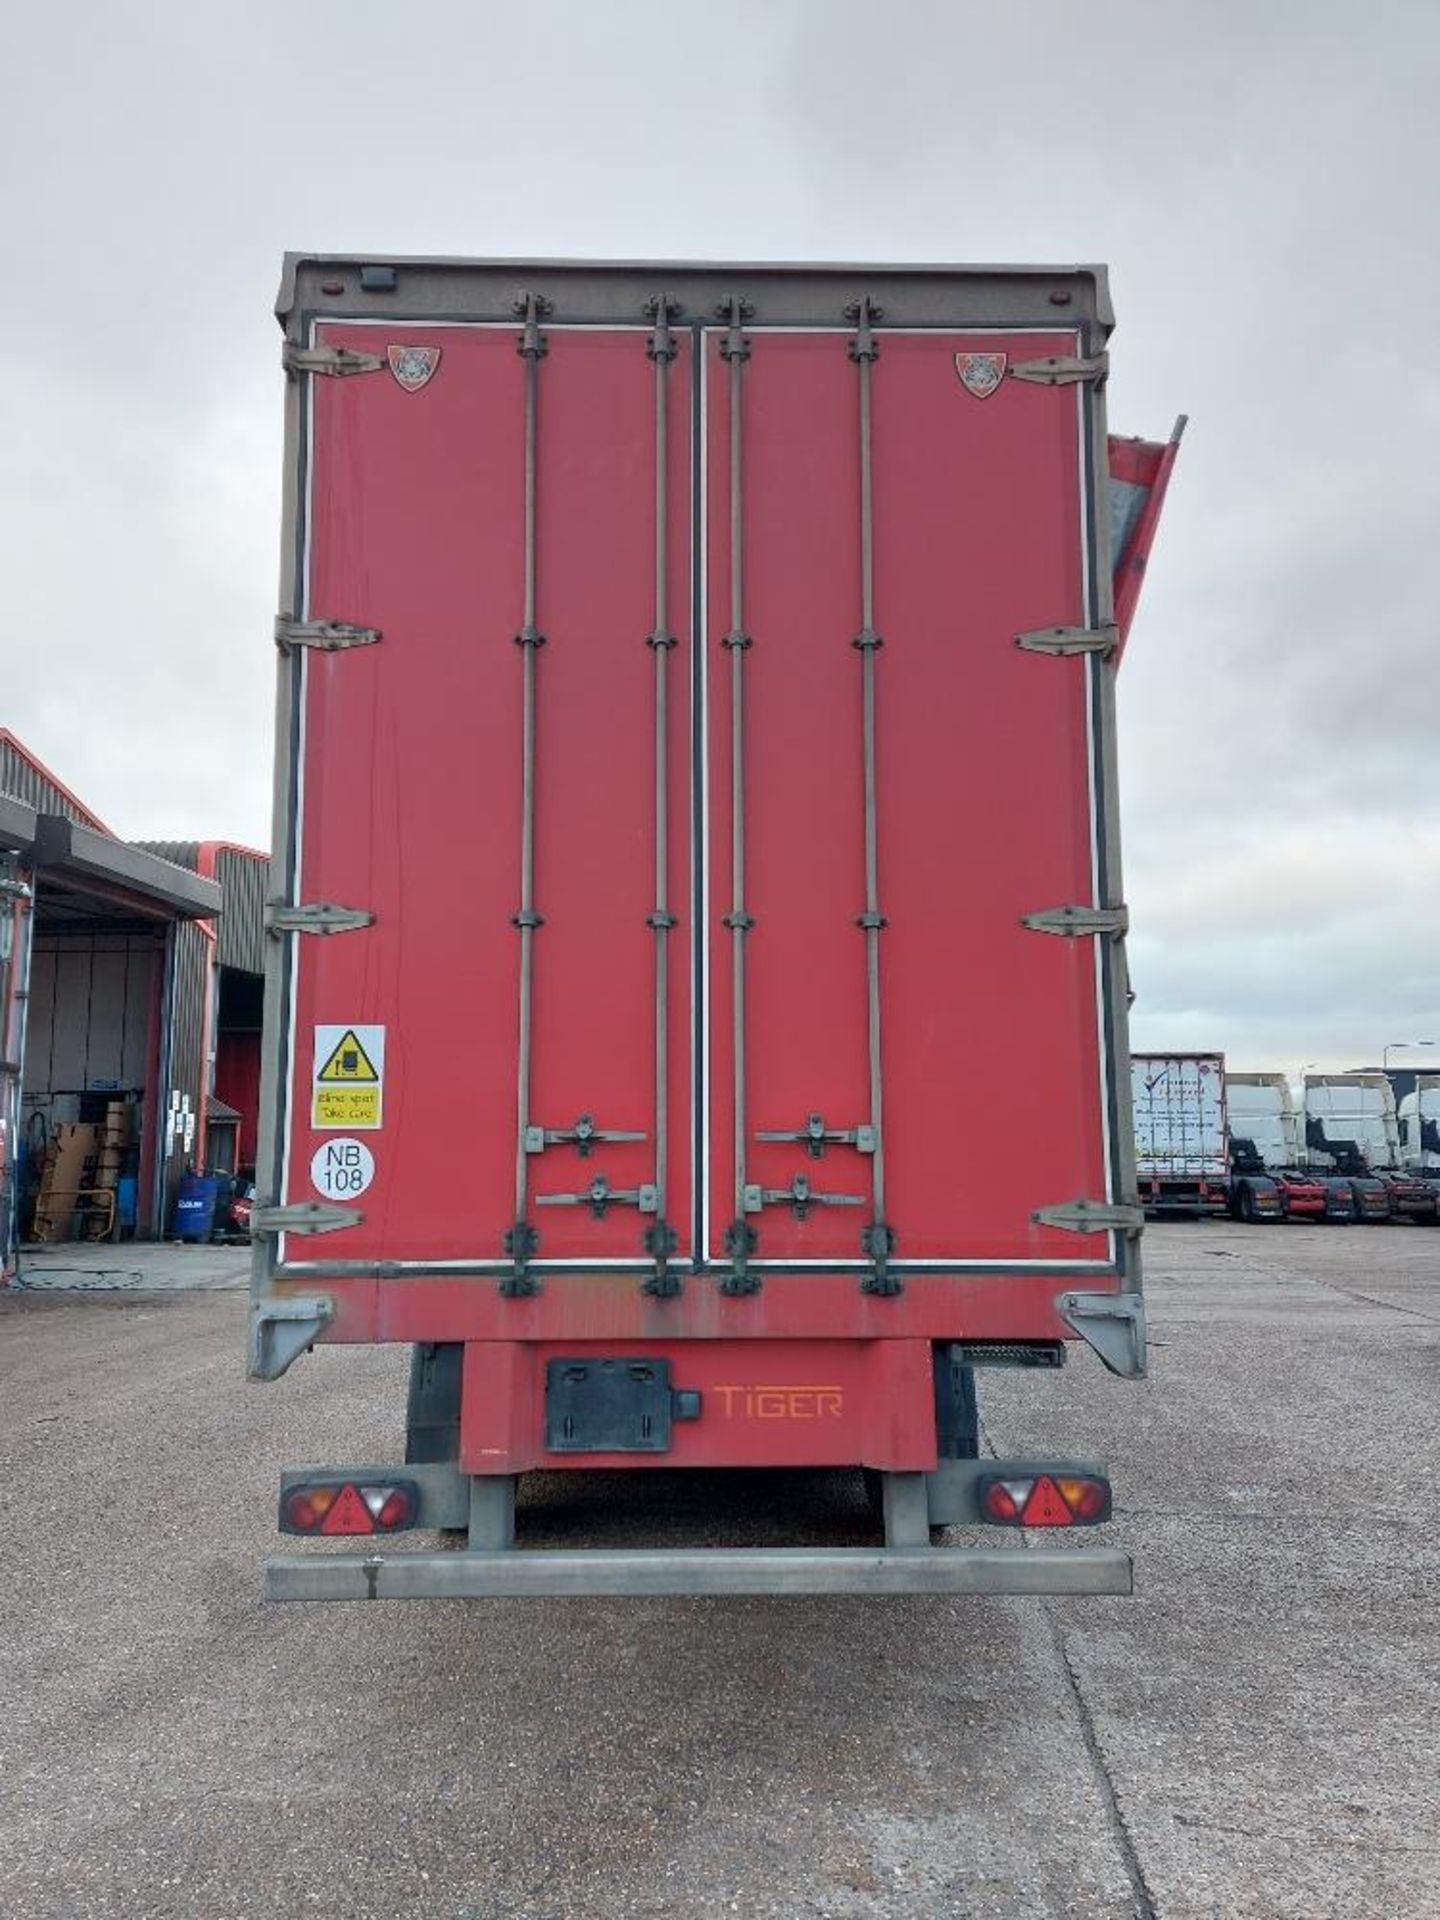 Tiger Tri-Axle 13.7m Curtain Side Trailer Unit - Image 6 of 8